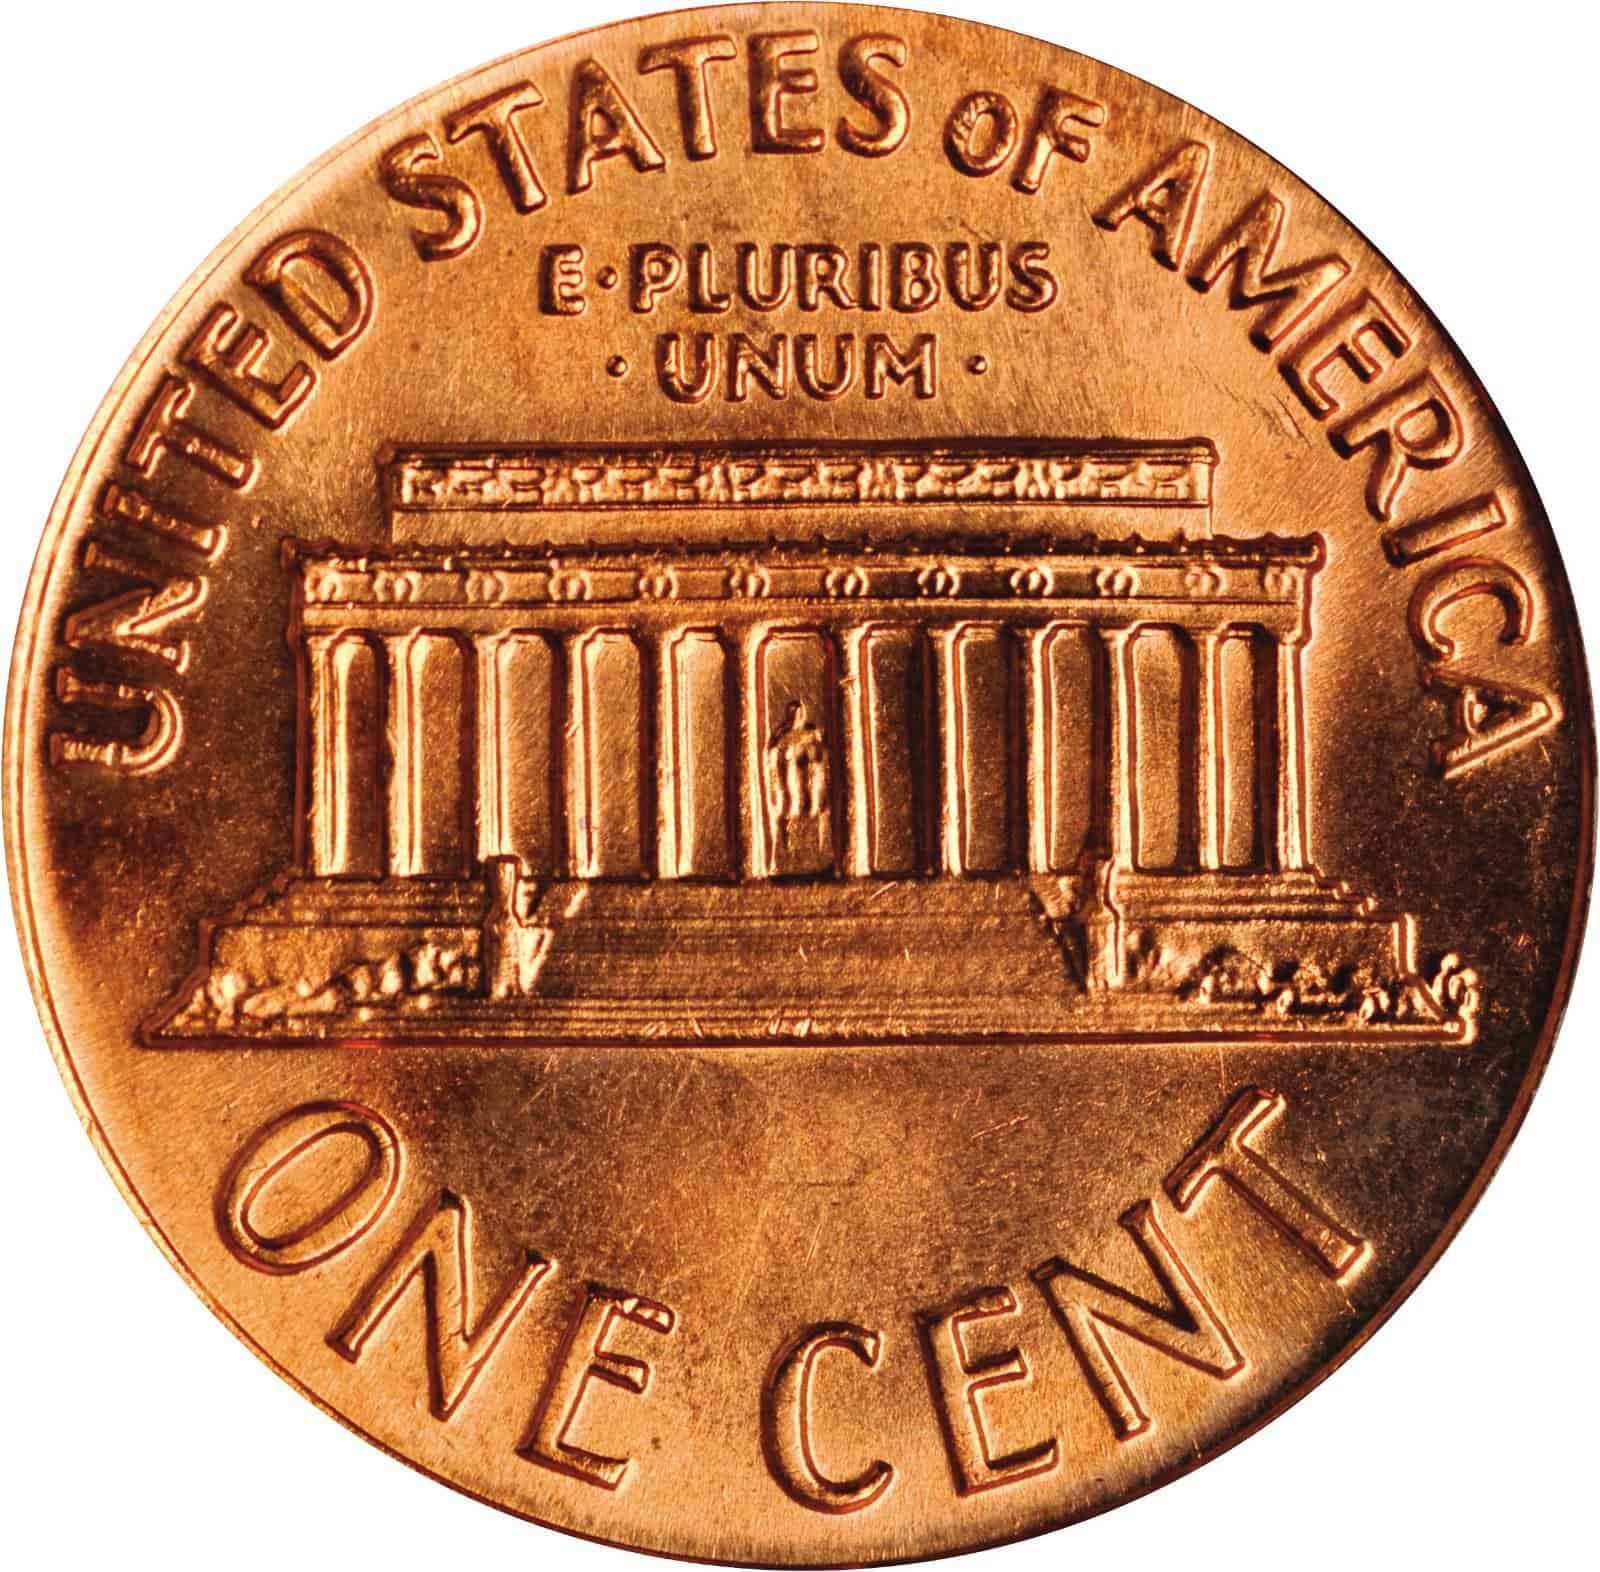 The reverse of the 1972 Lincoln penny